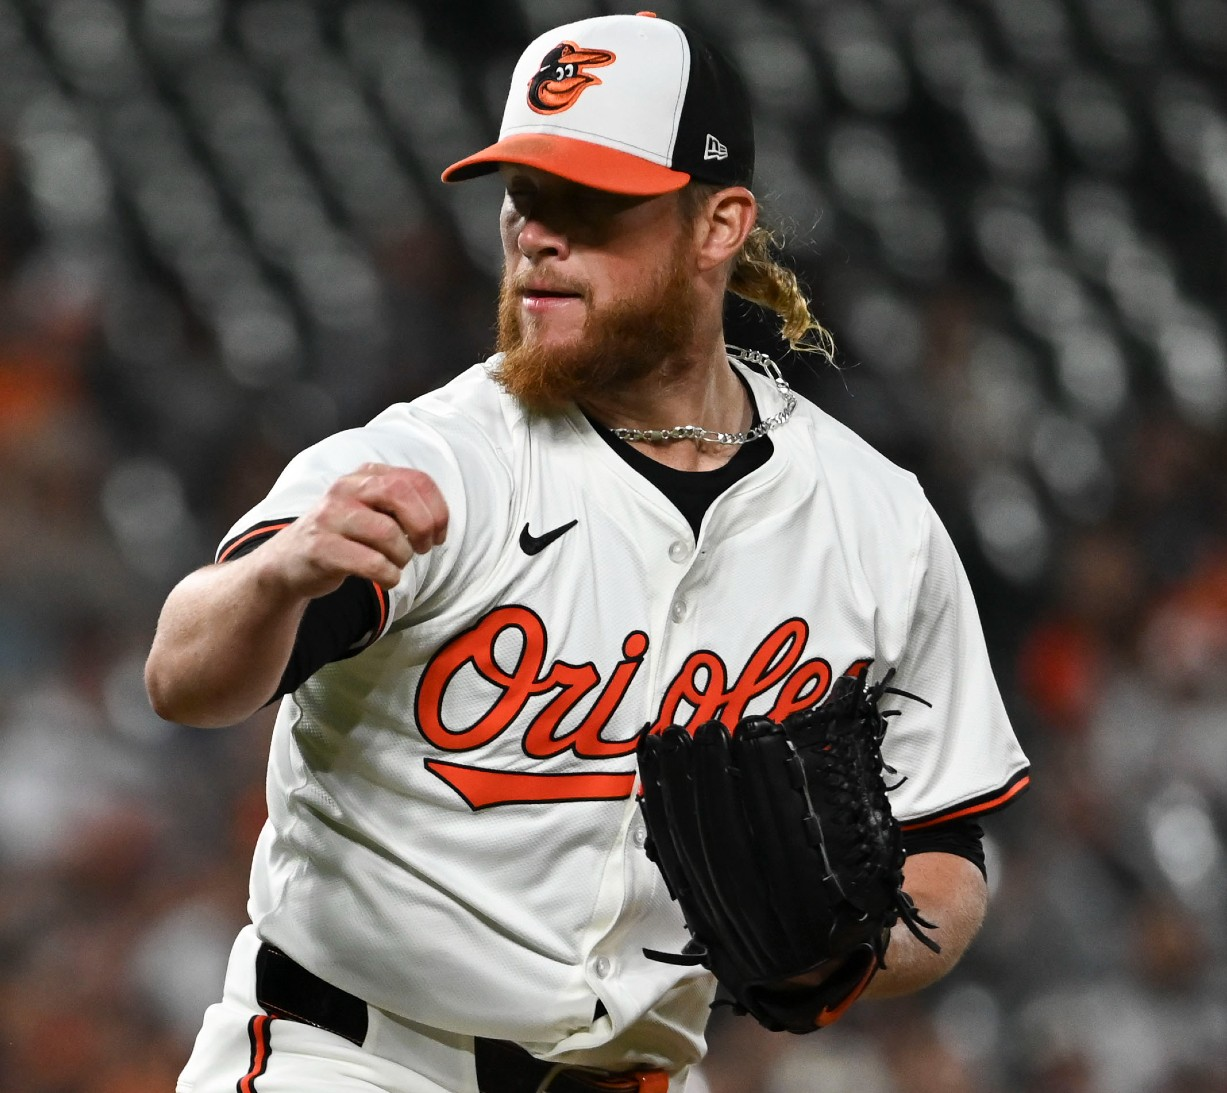 Jim Hunter evaluates Orioles bullpen through early stages of season